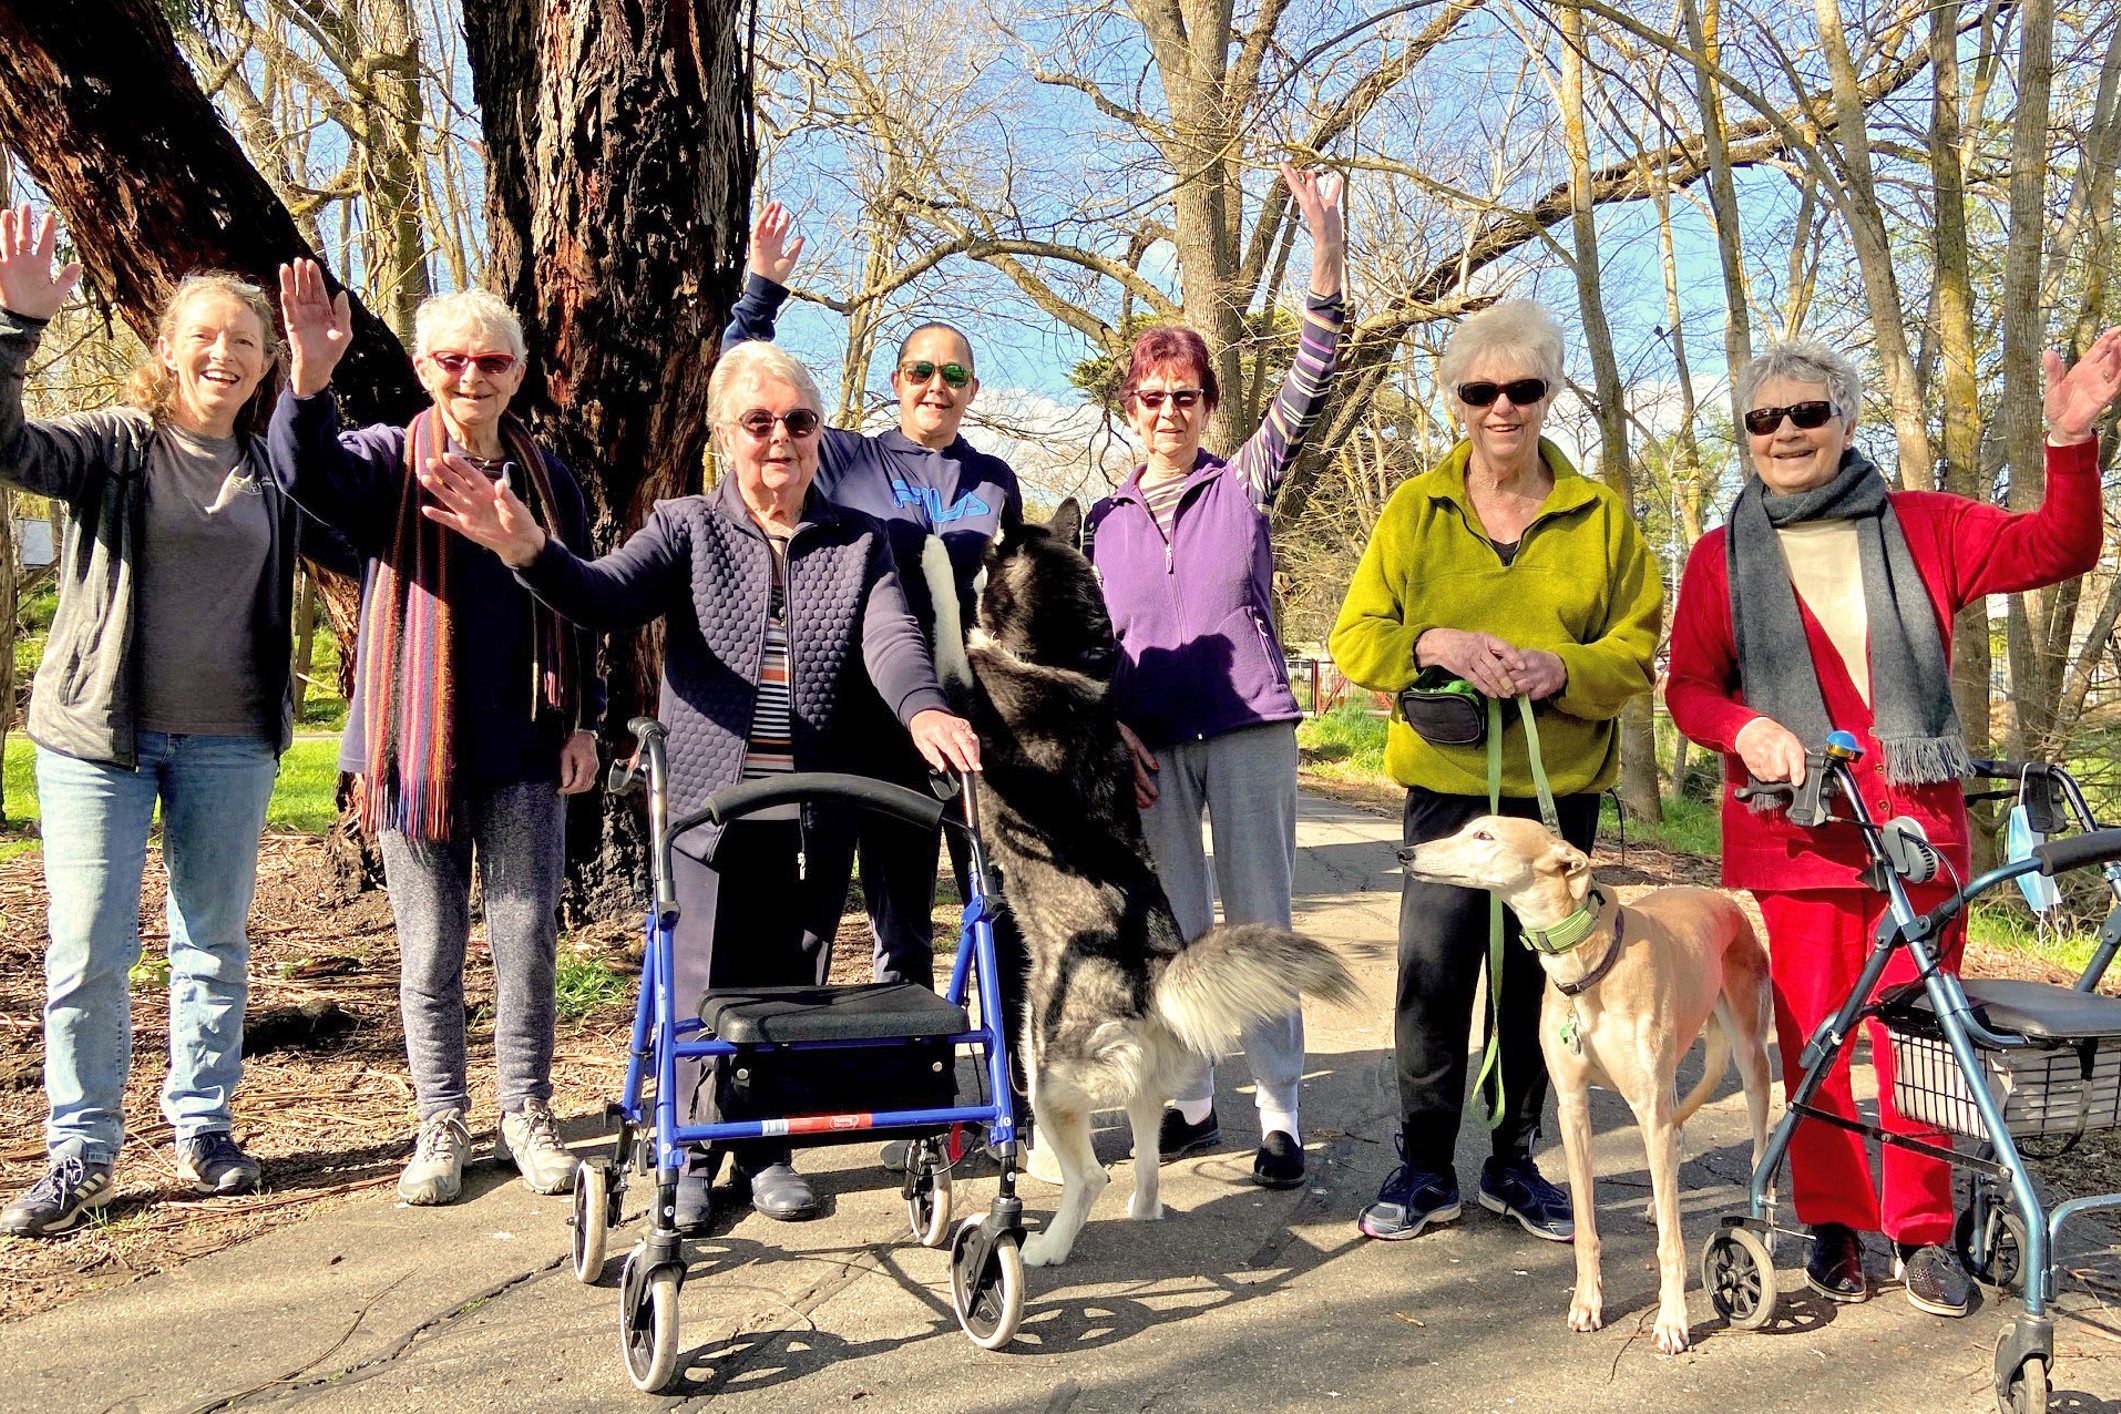 Walking 24km for wildlife at age 88